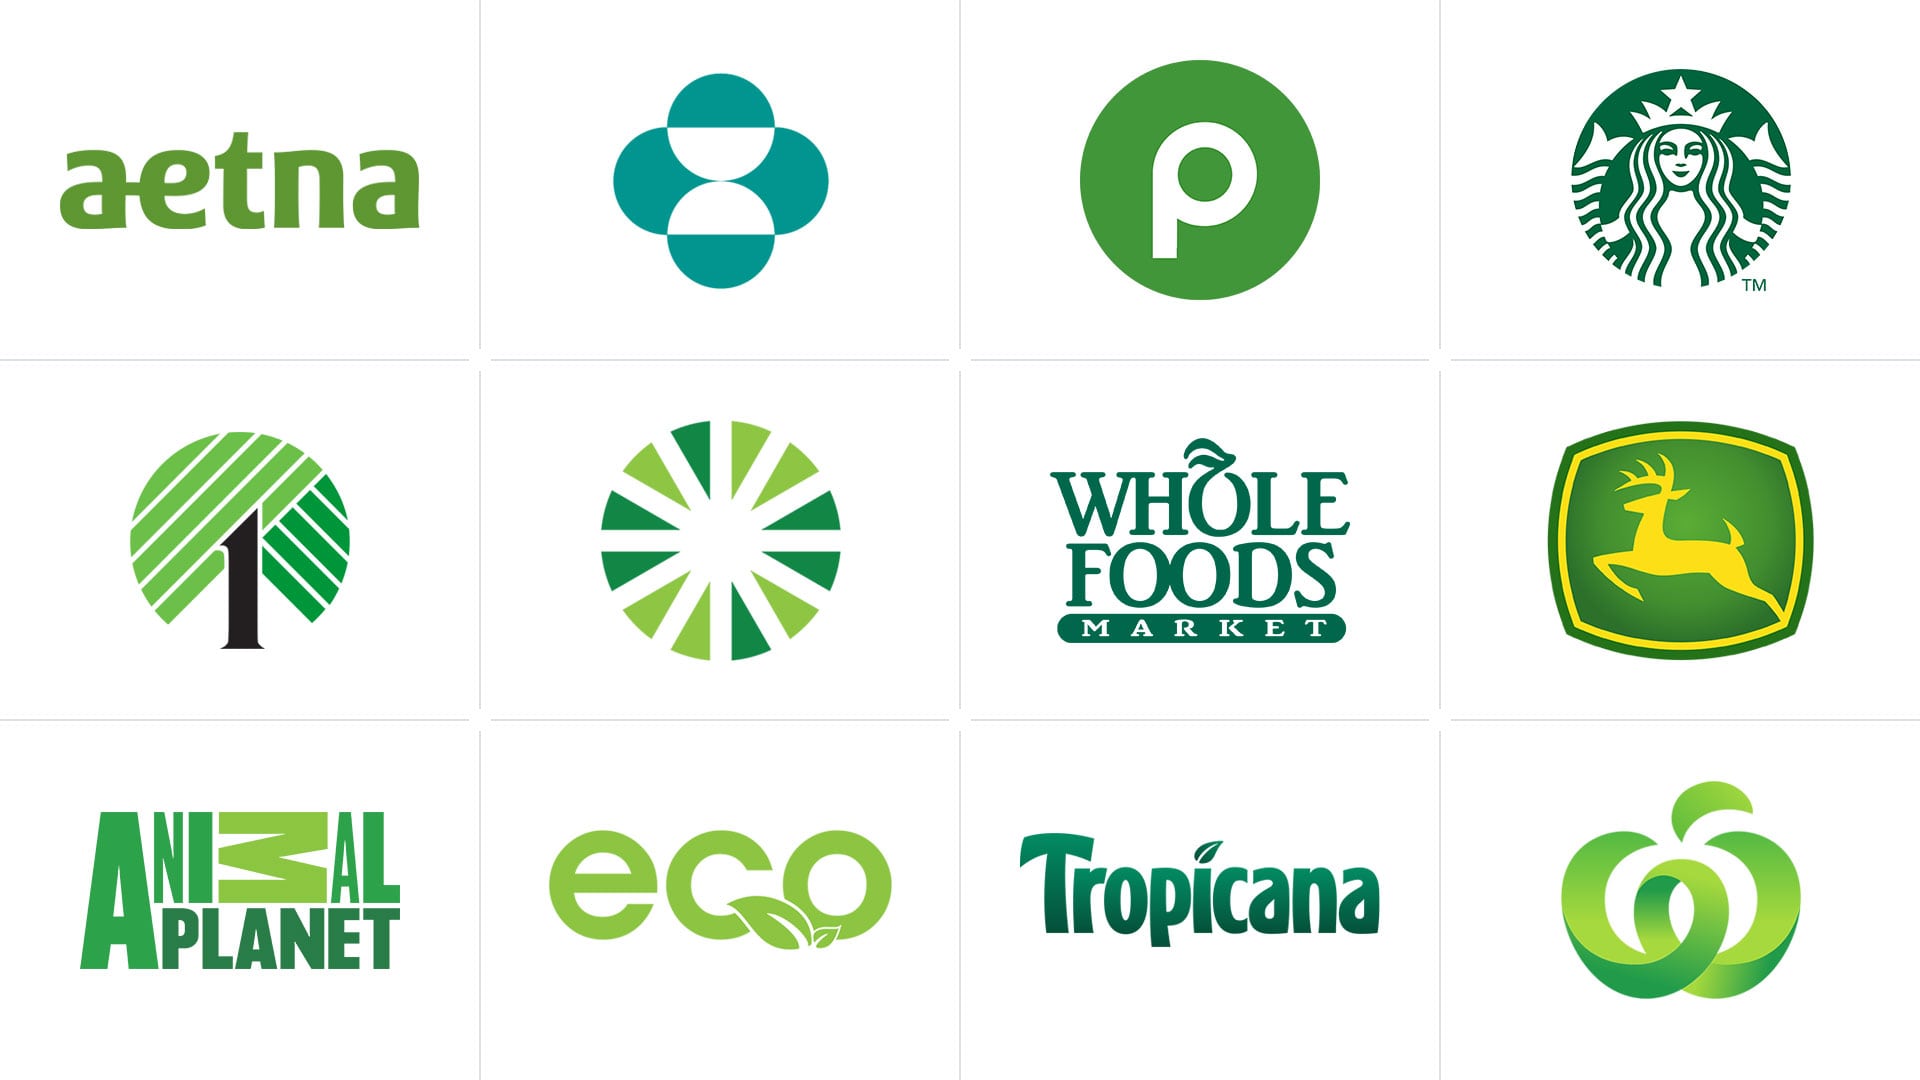 Green Color Usage Examples in Popular Logos